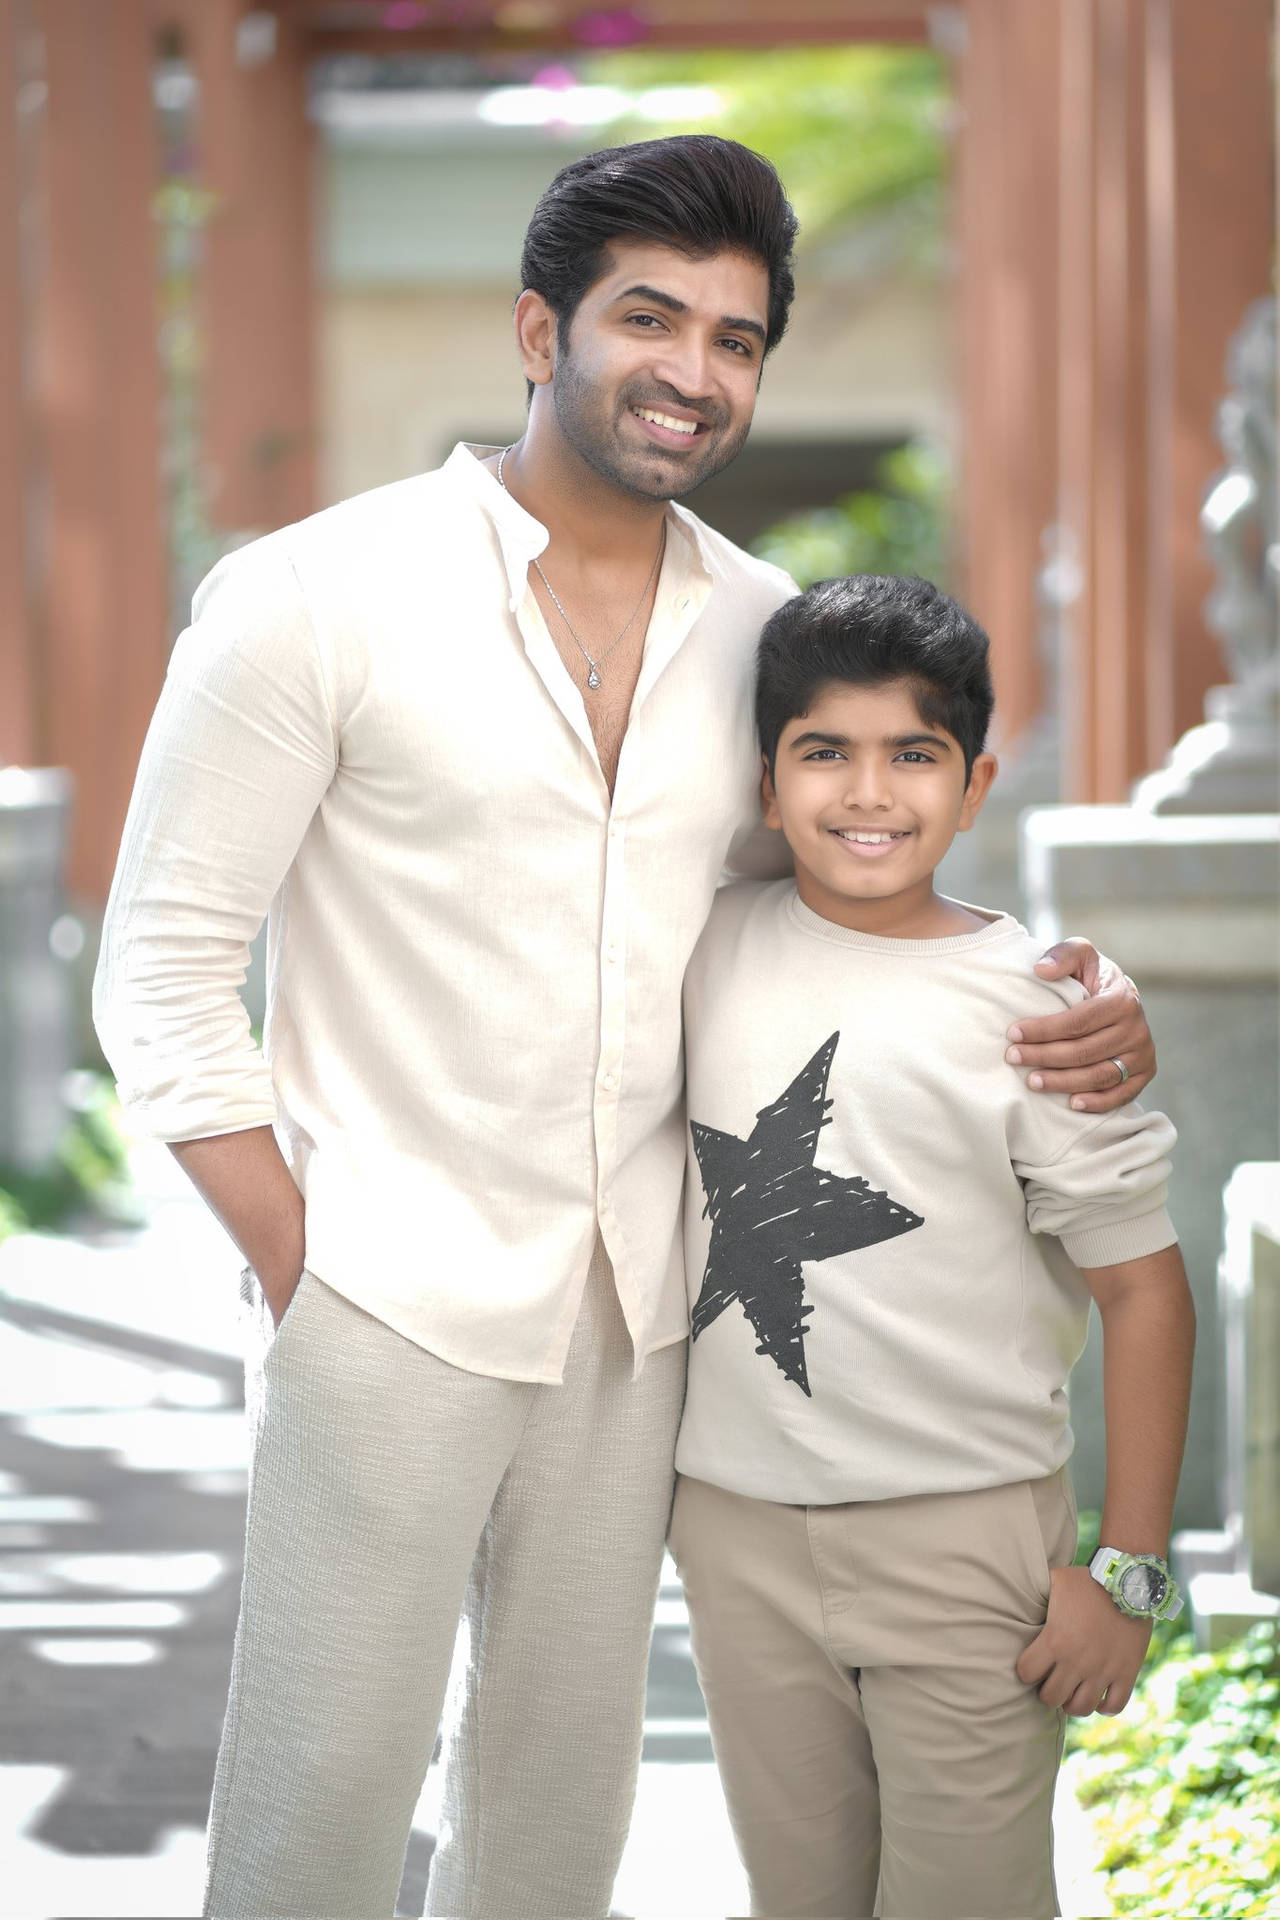 Arun Vijay Poses With A Young Fan